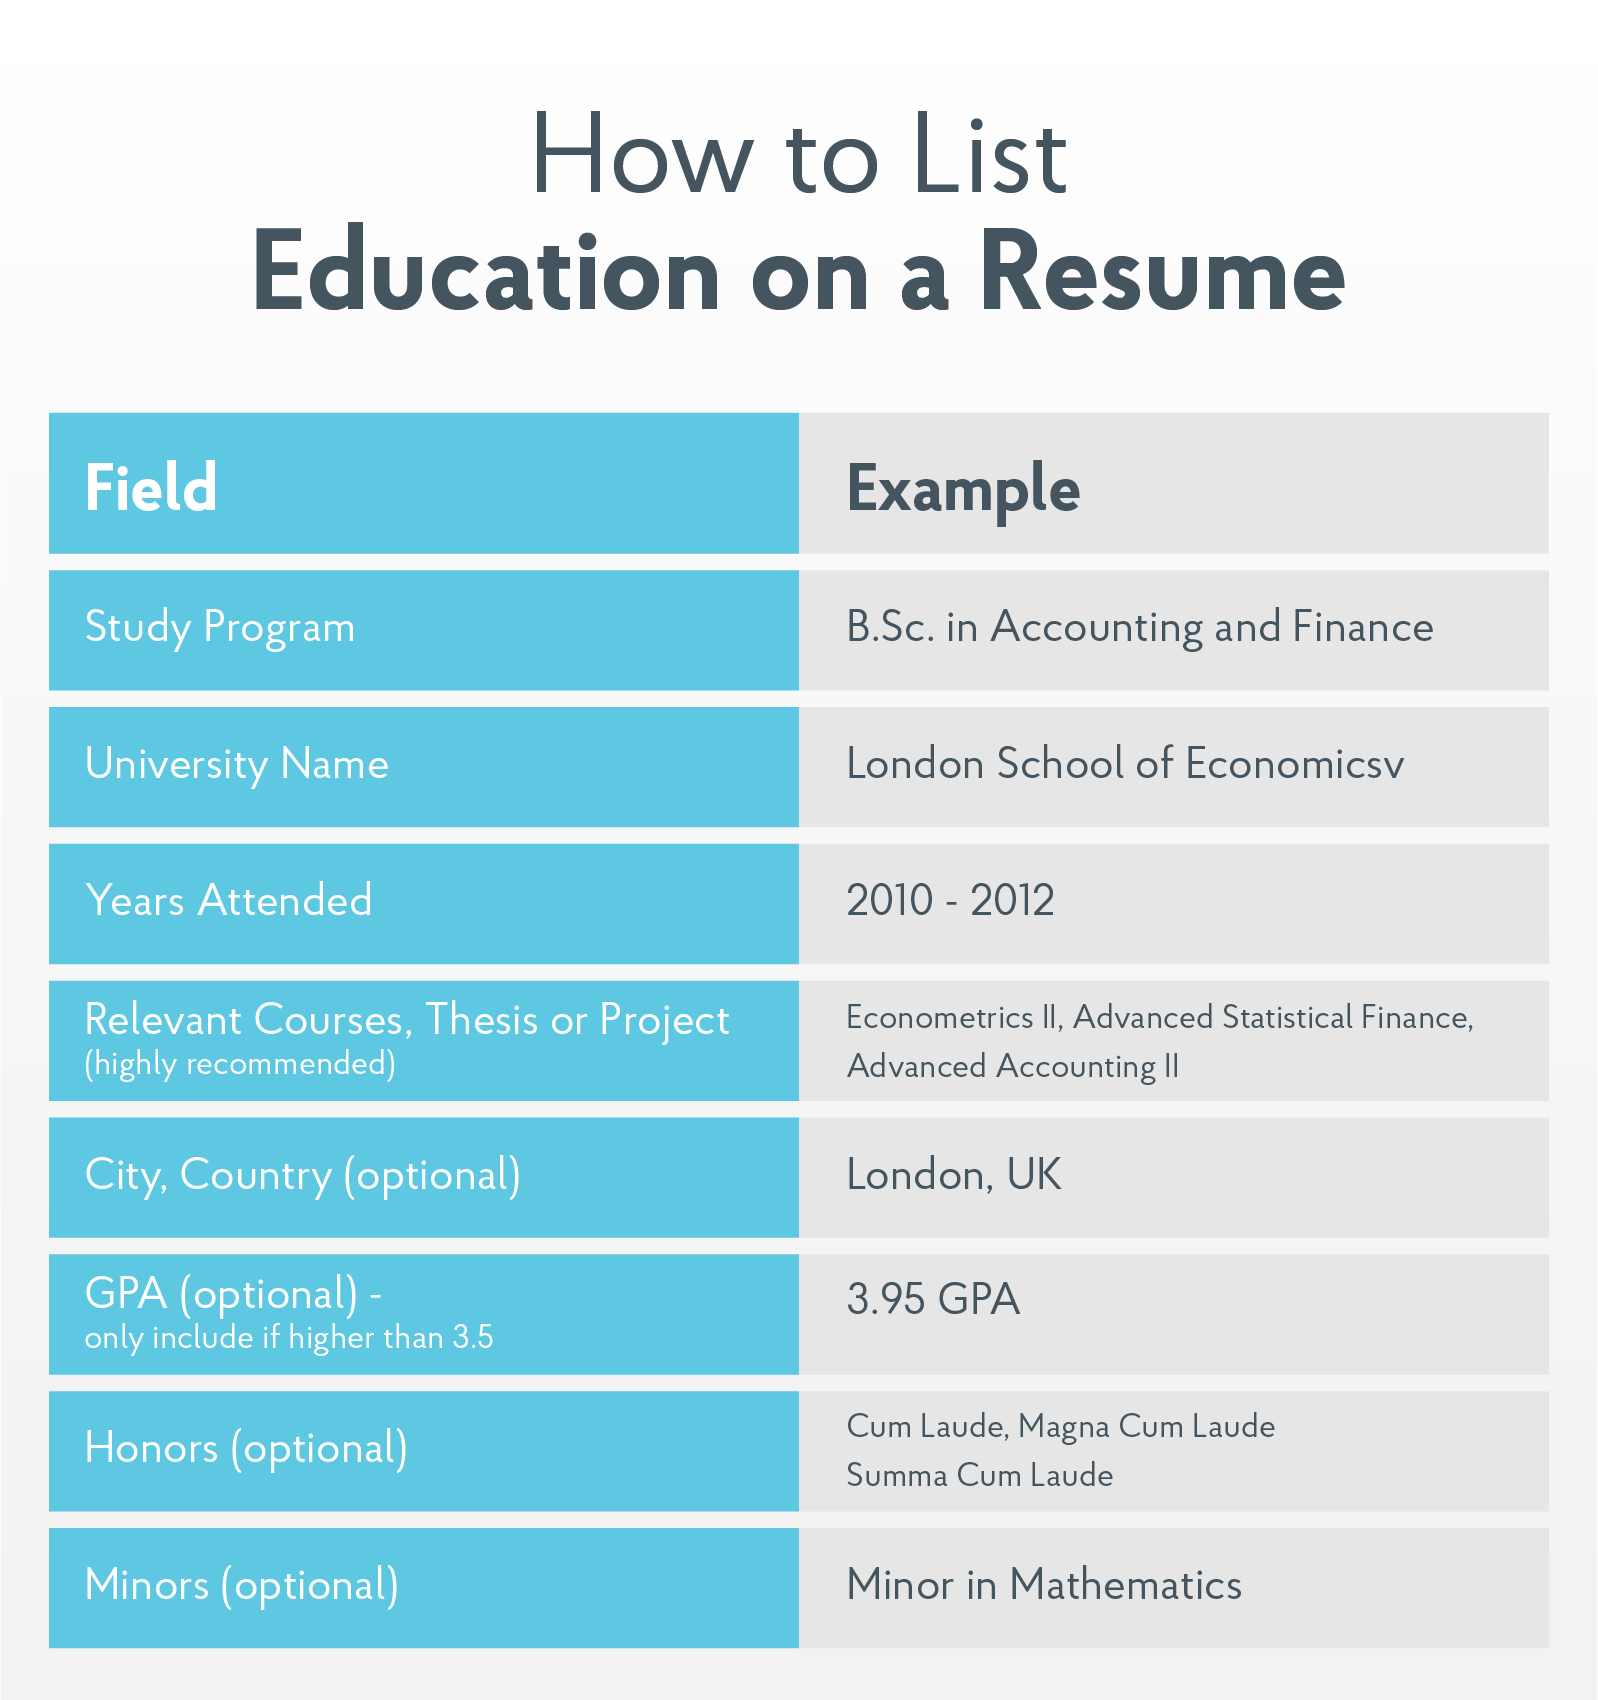 what to list on education section on resume